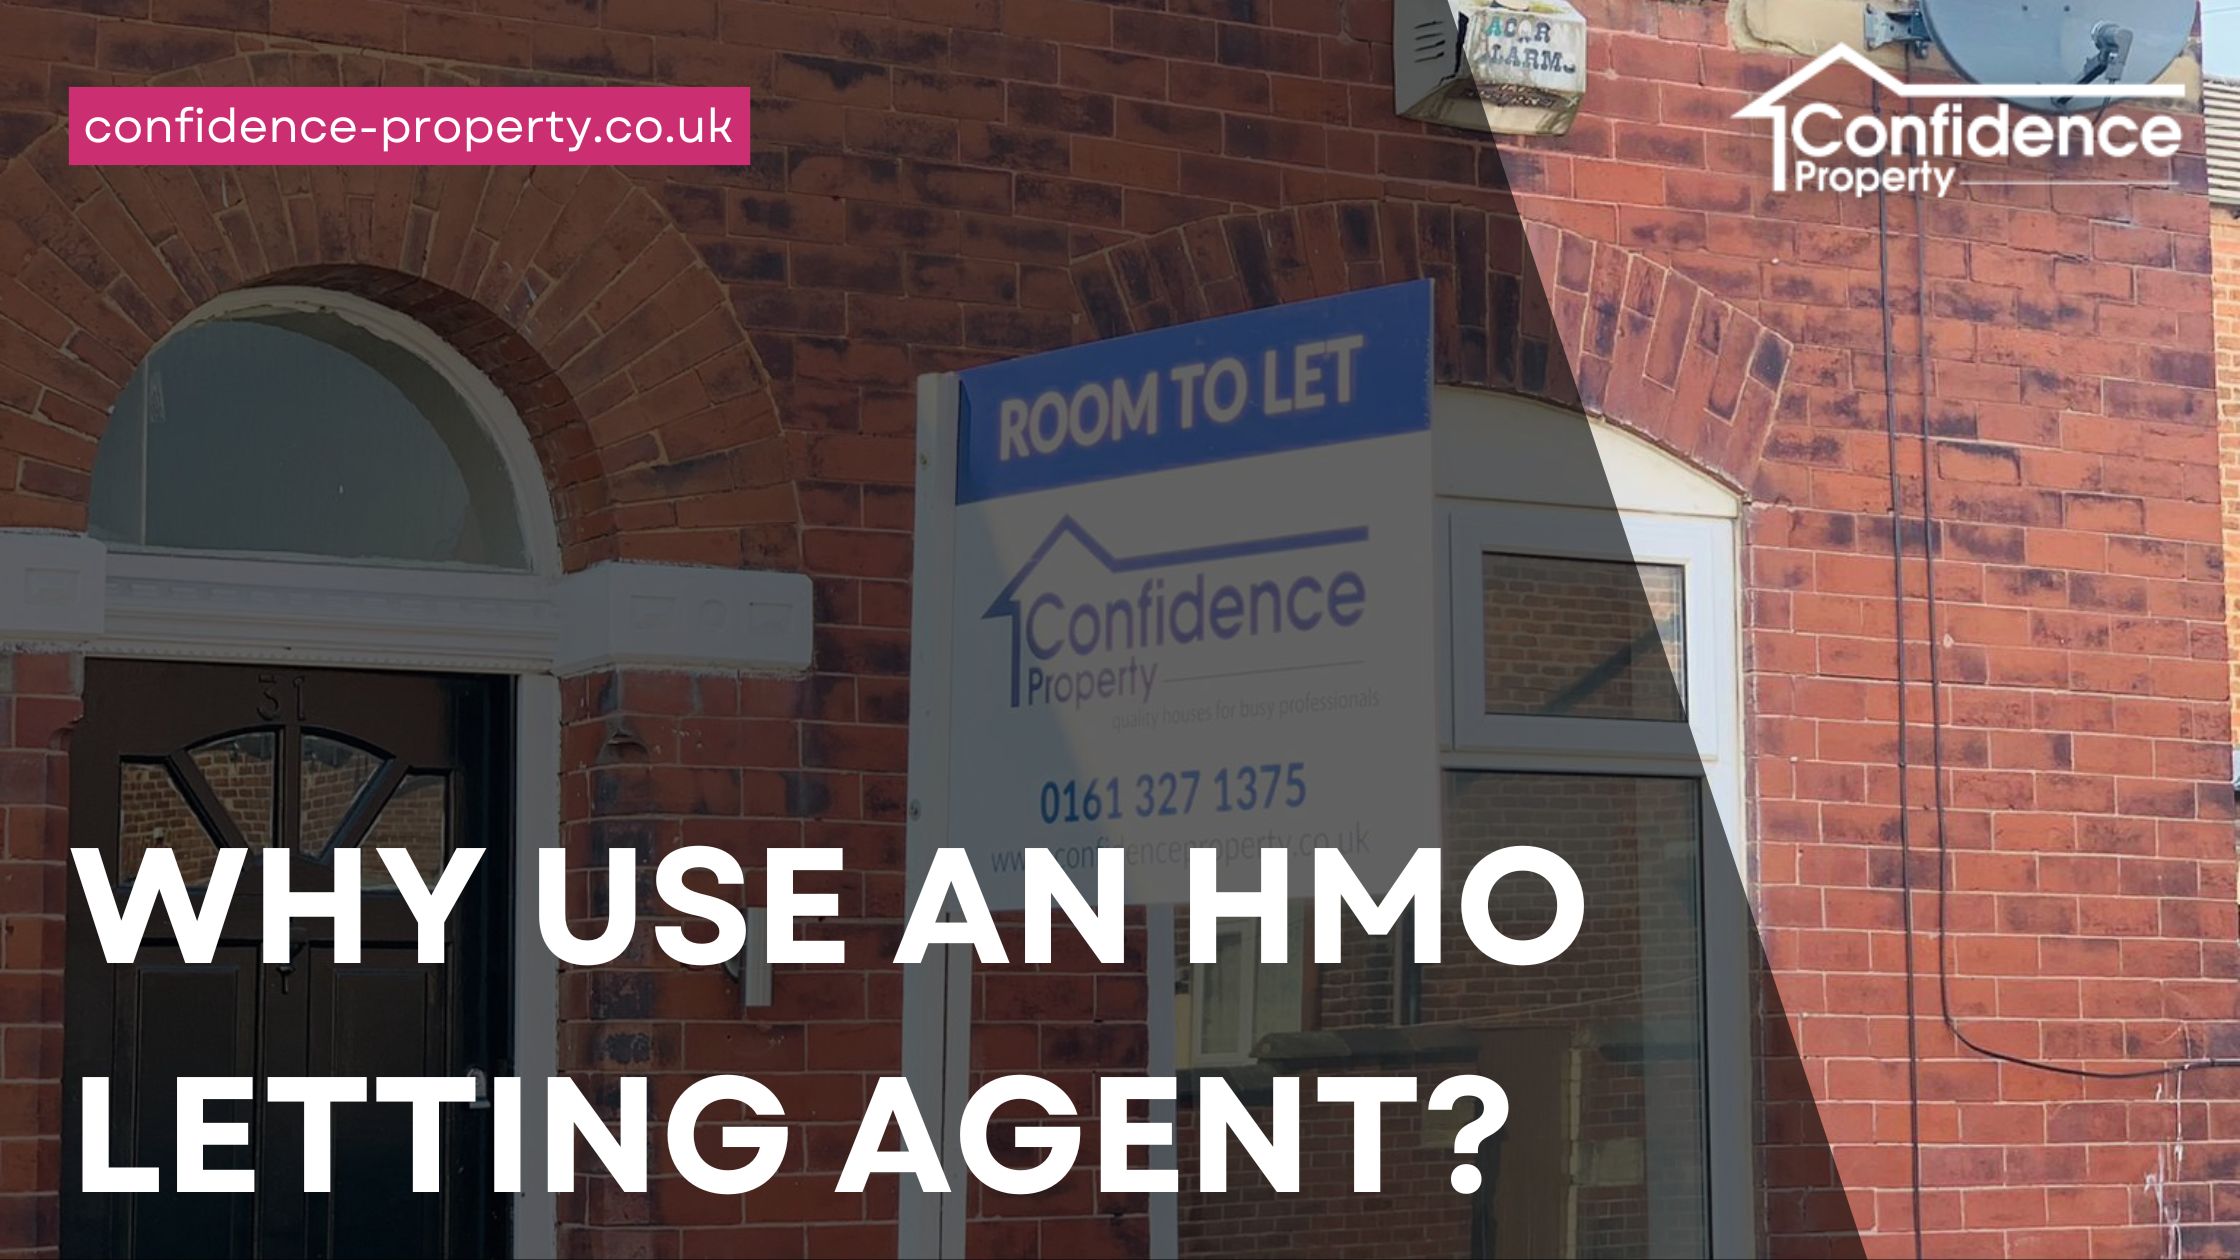 HMO letting agent